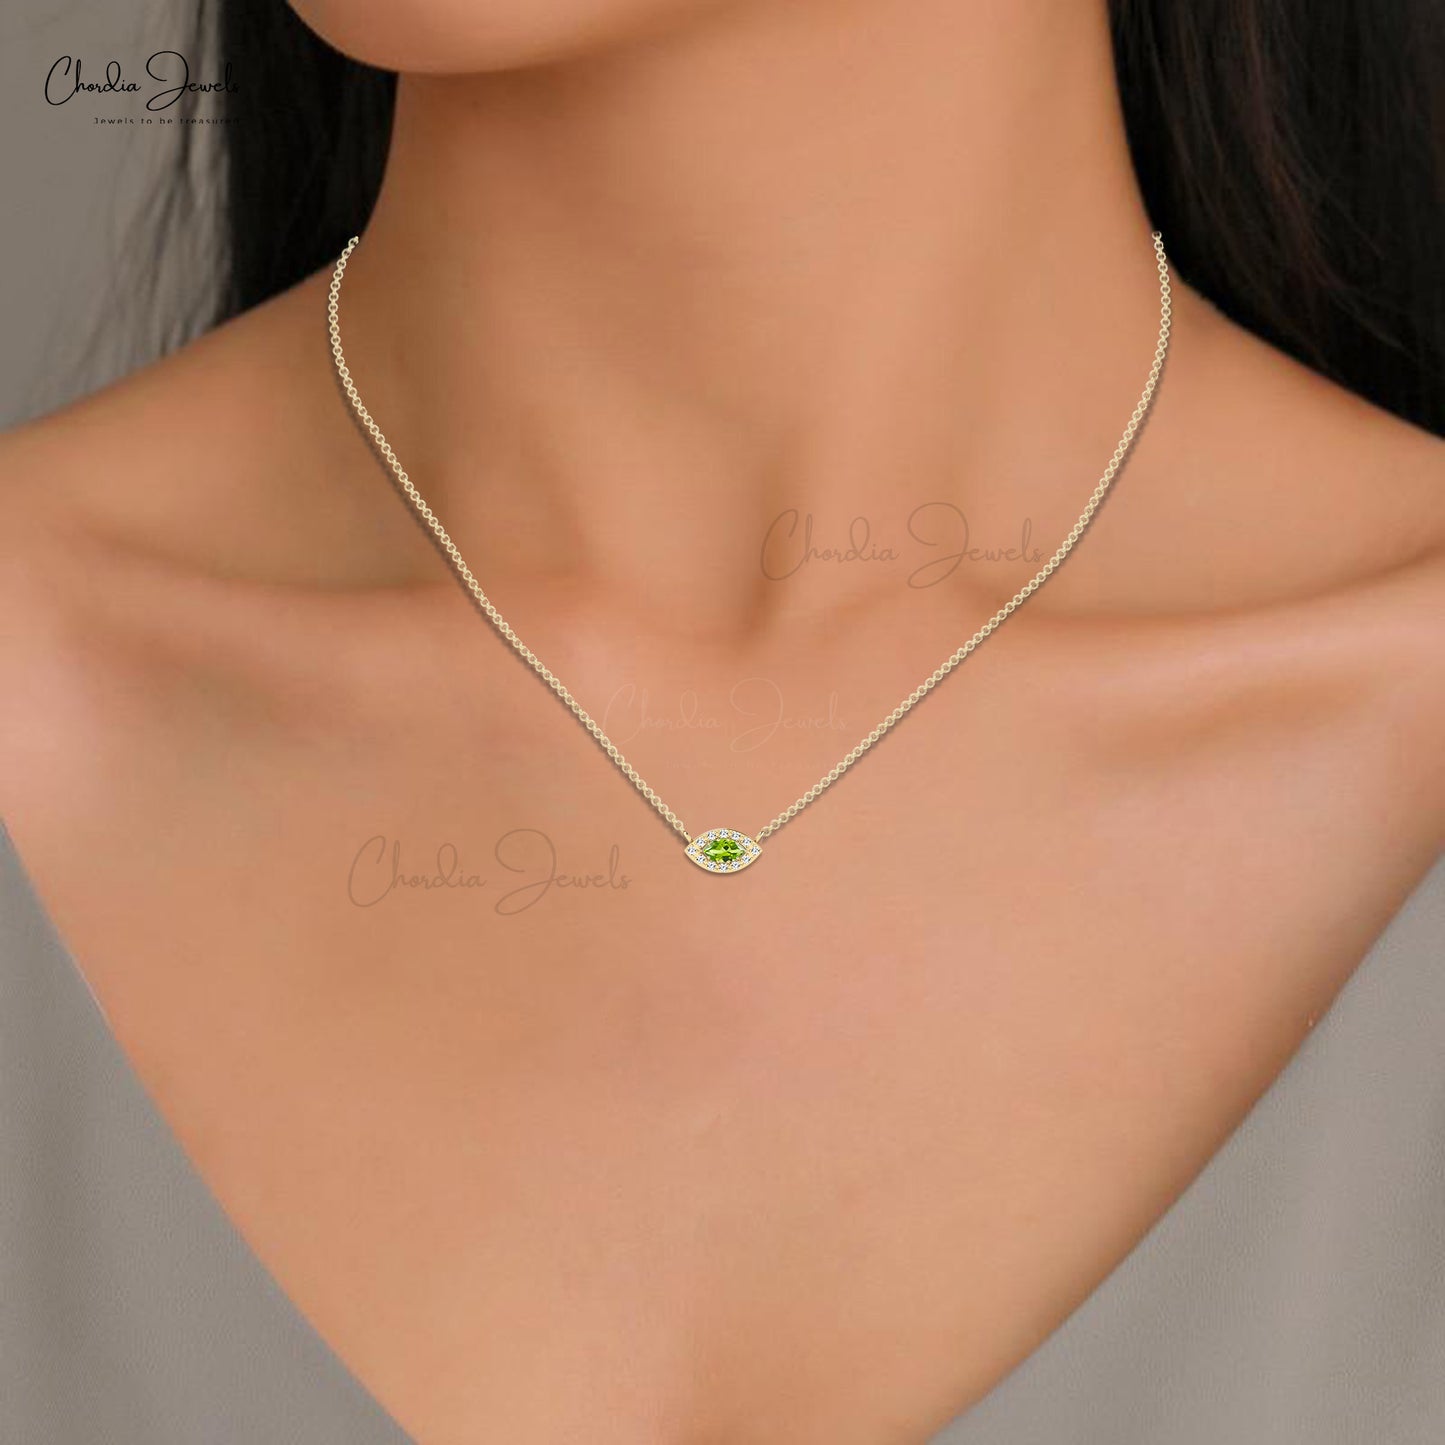 Load image into Gallery viewer, Trendy Marquise Cut Eye Shape Natural Gemstone Halo Necklace Pendant in 14k Pure Gold White Diamond and Green Peridot Necklace Hallmarked Jewelry For Her
